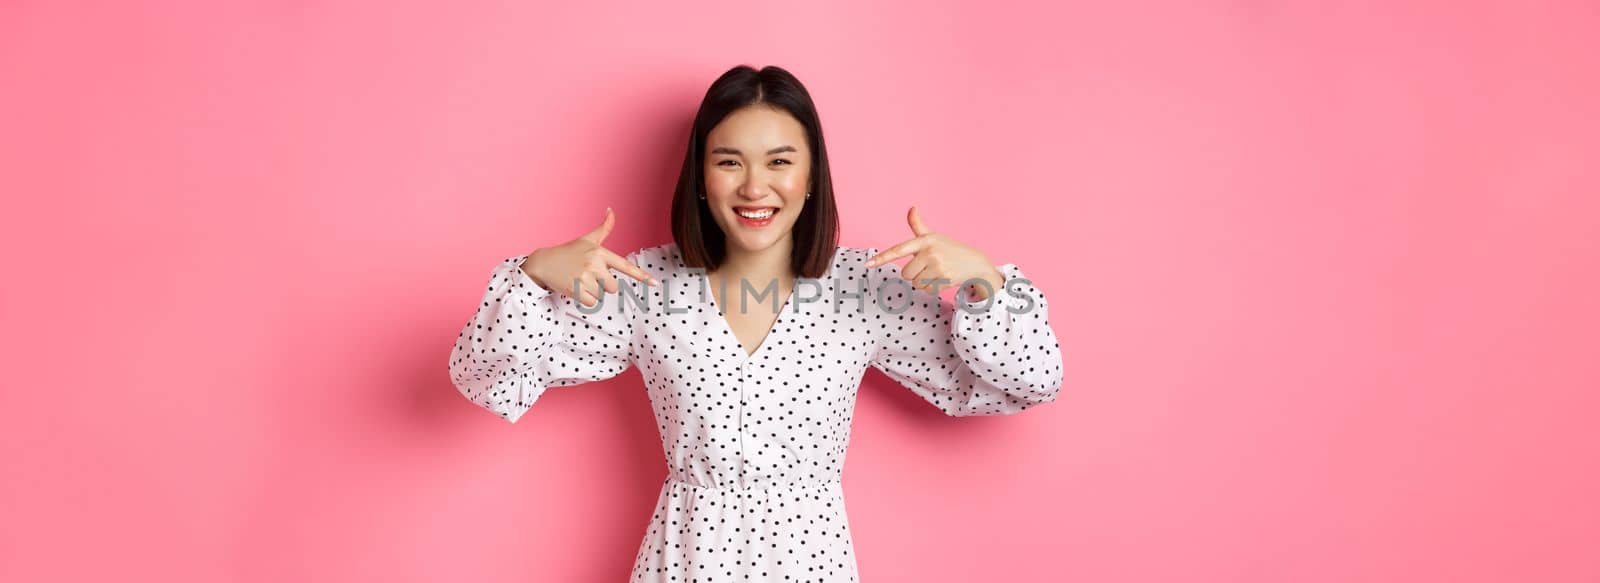 Beautiful korean woman pointing fingers at your logo and smiling, standing in dress over romantic pink background. Copy space